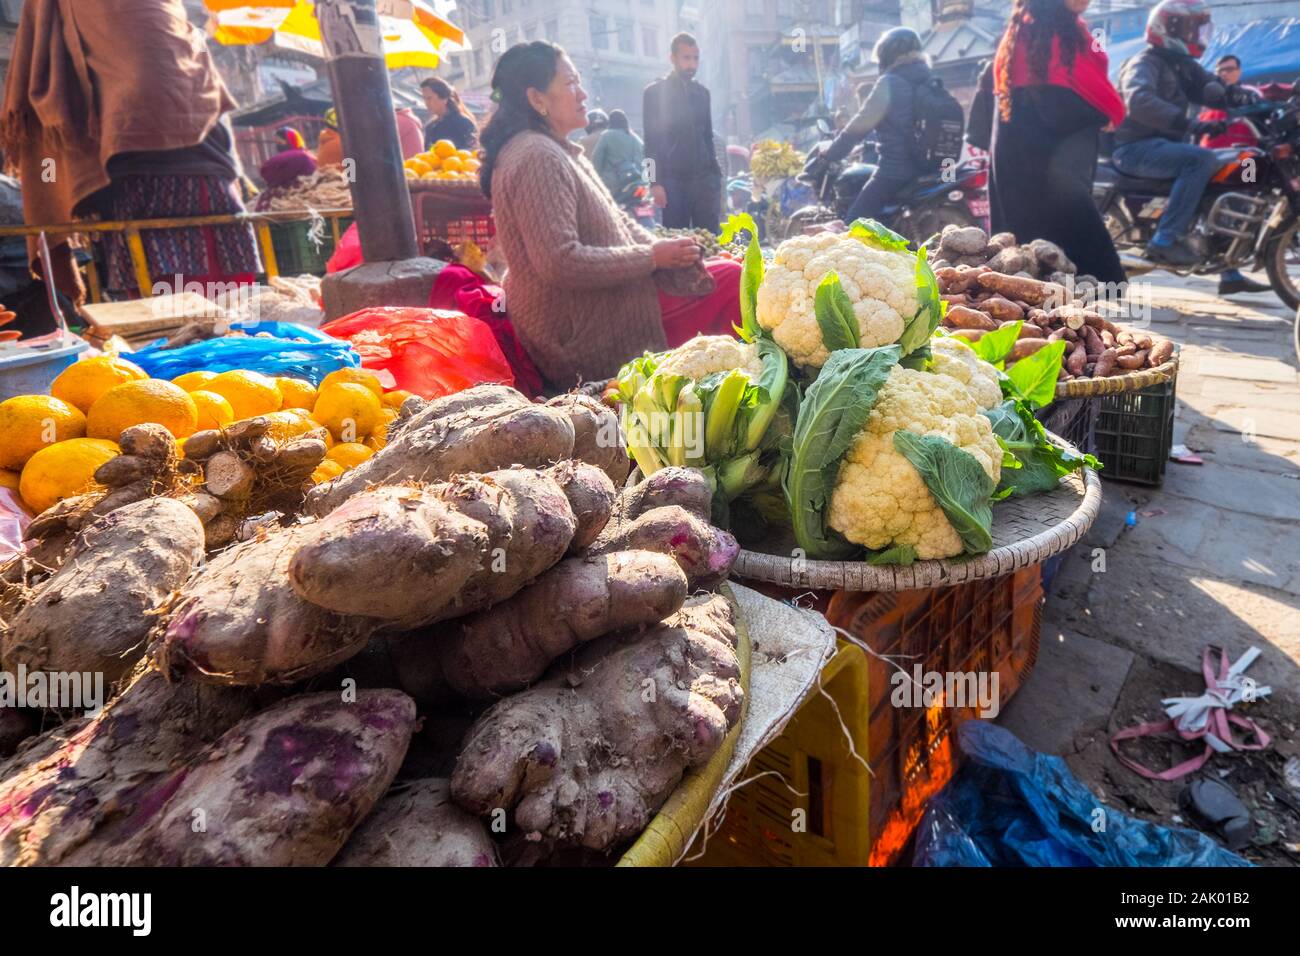 Fruit and vegetables for sale at an open air market in Kathmandu, Nepal Stock Photo